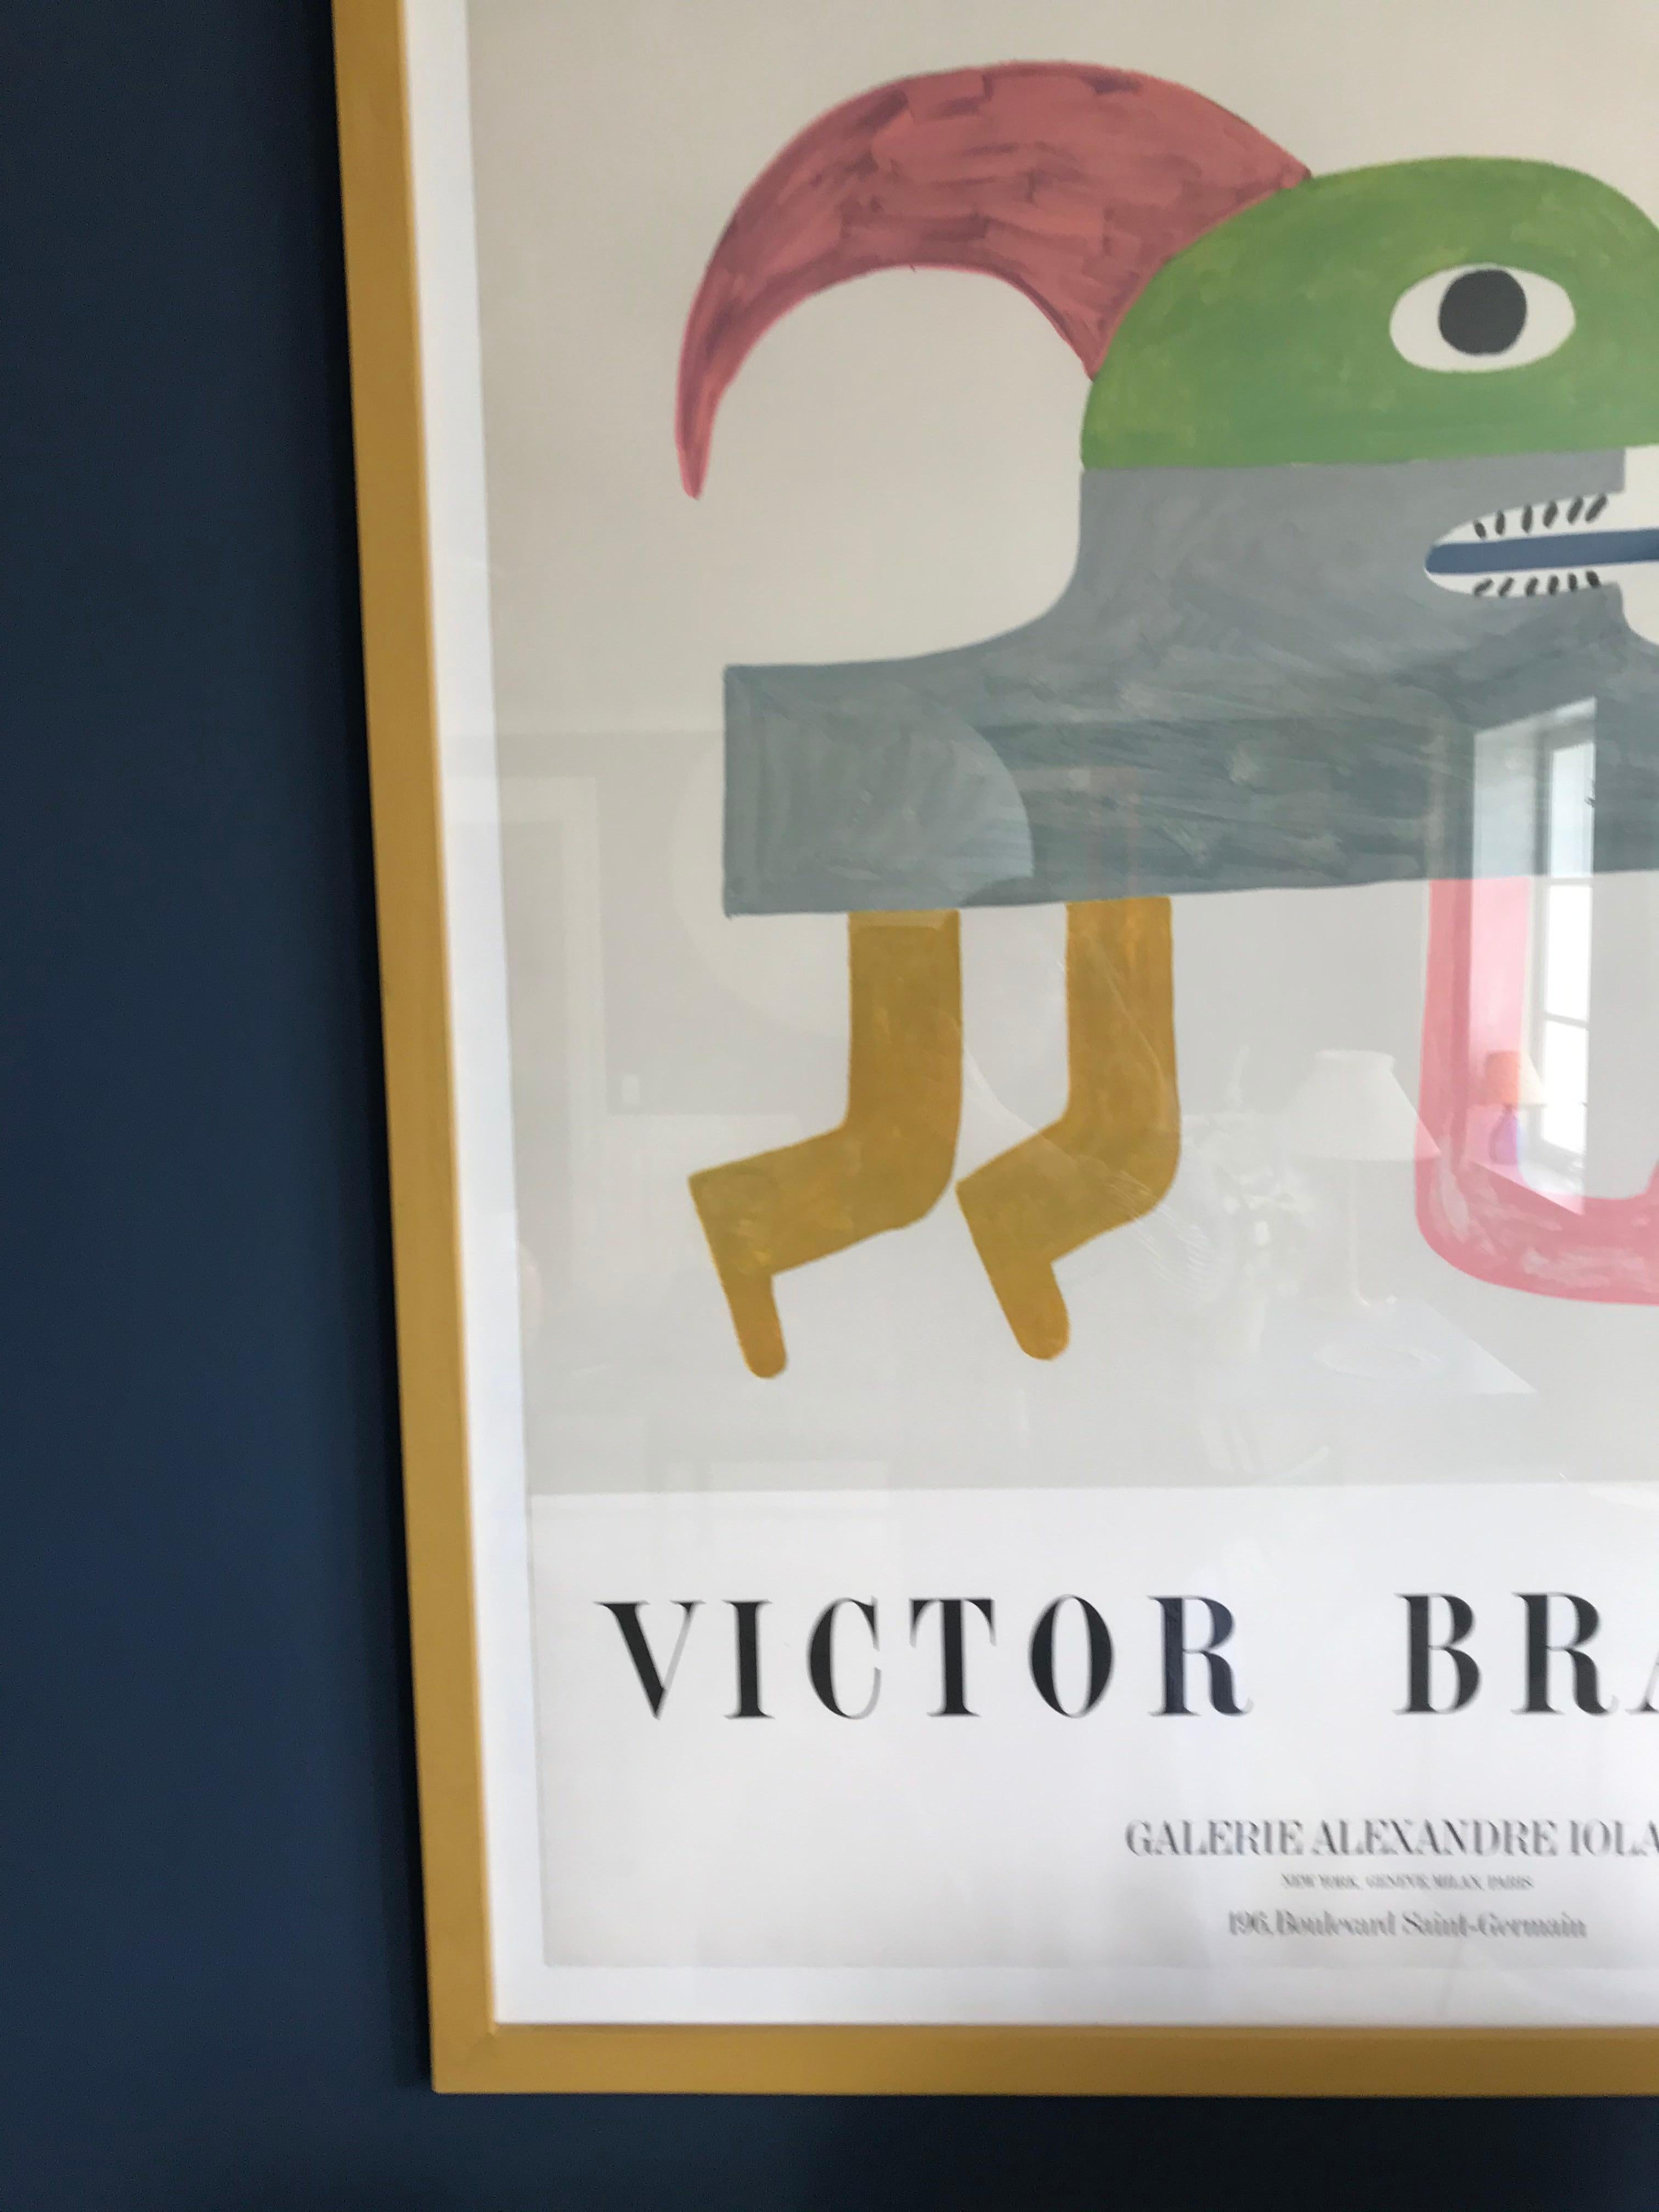 Late 20th Century Vintage Victor Brauner Exhibition Poster At Galerie Alexandre Iolas, France 1970